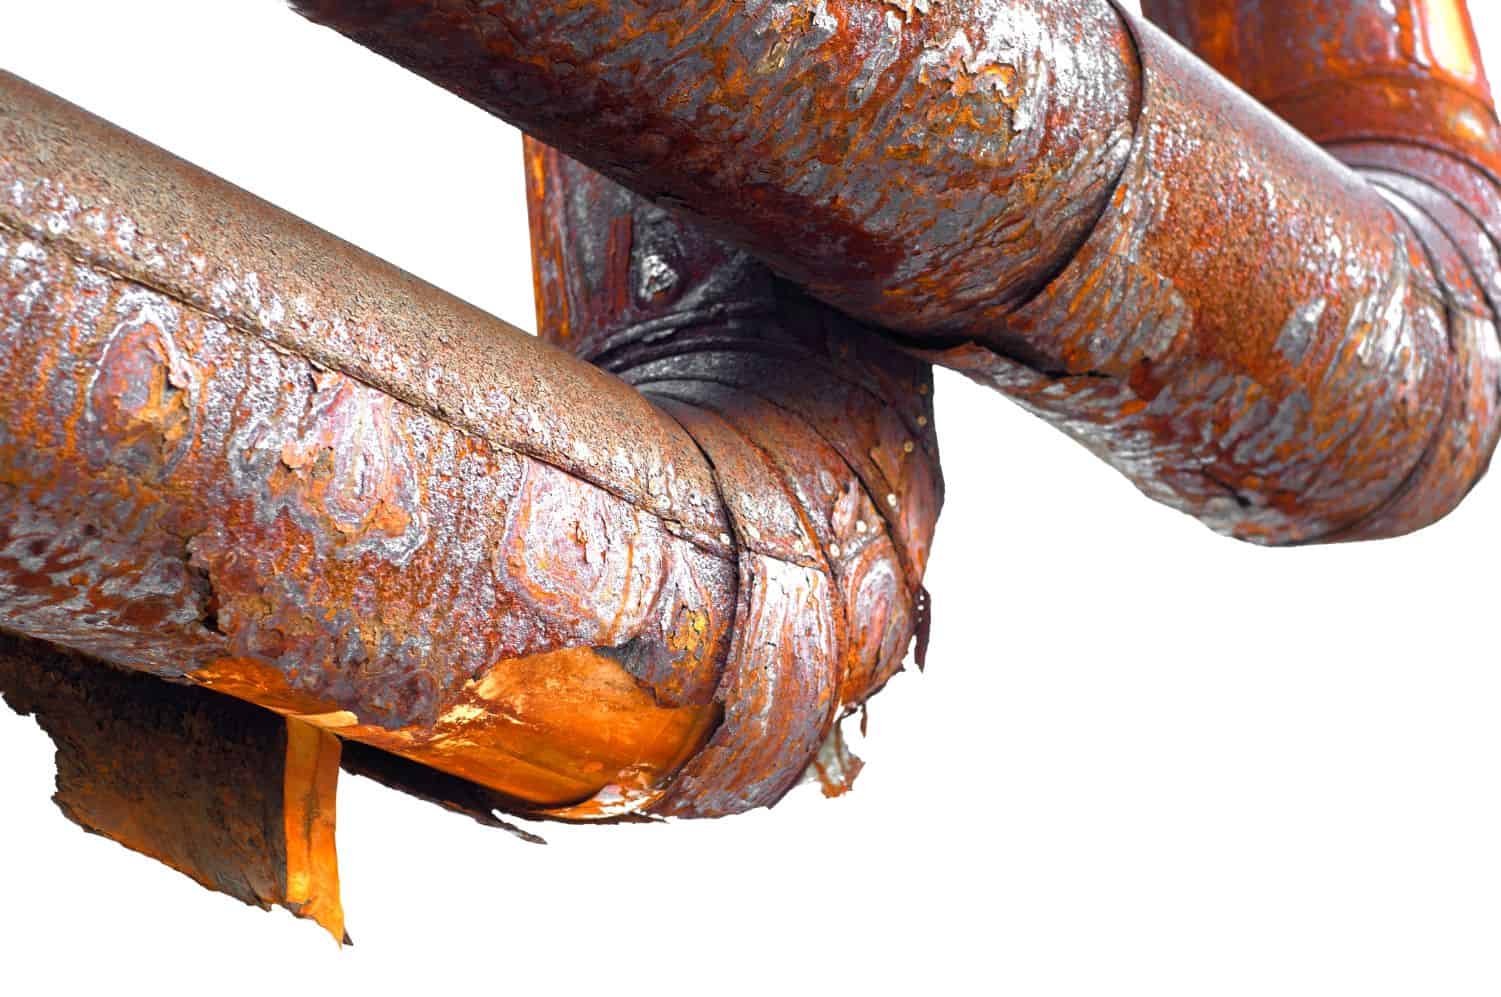 A common metallurgical problem for piping systems